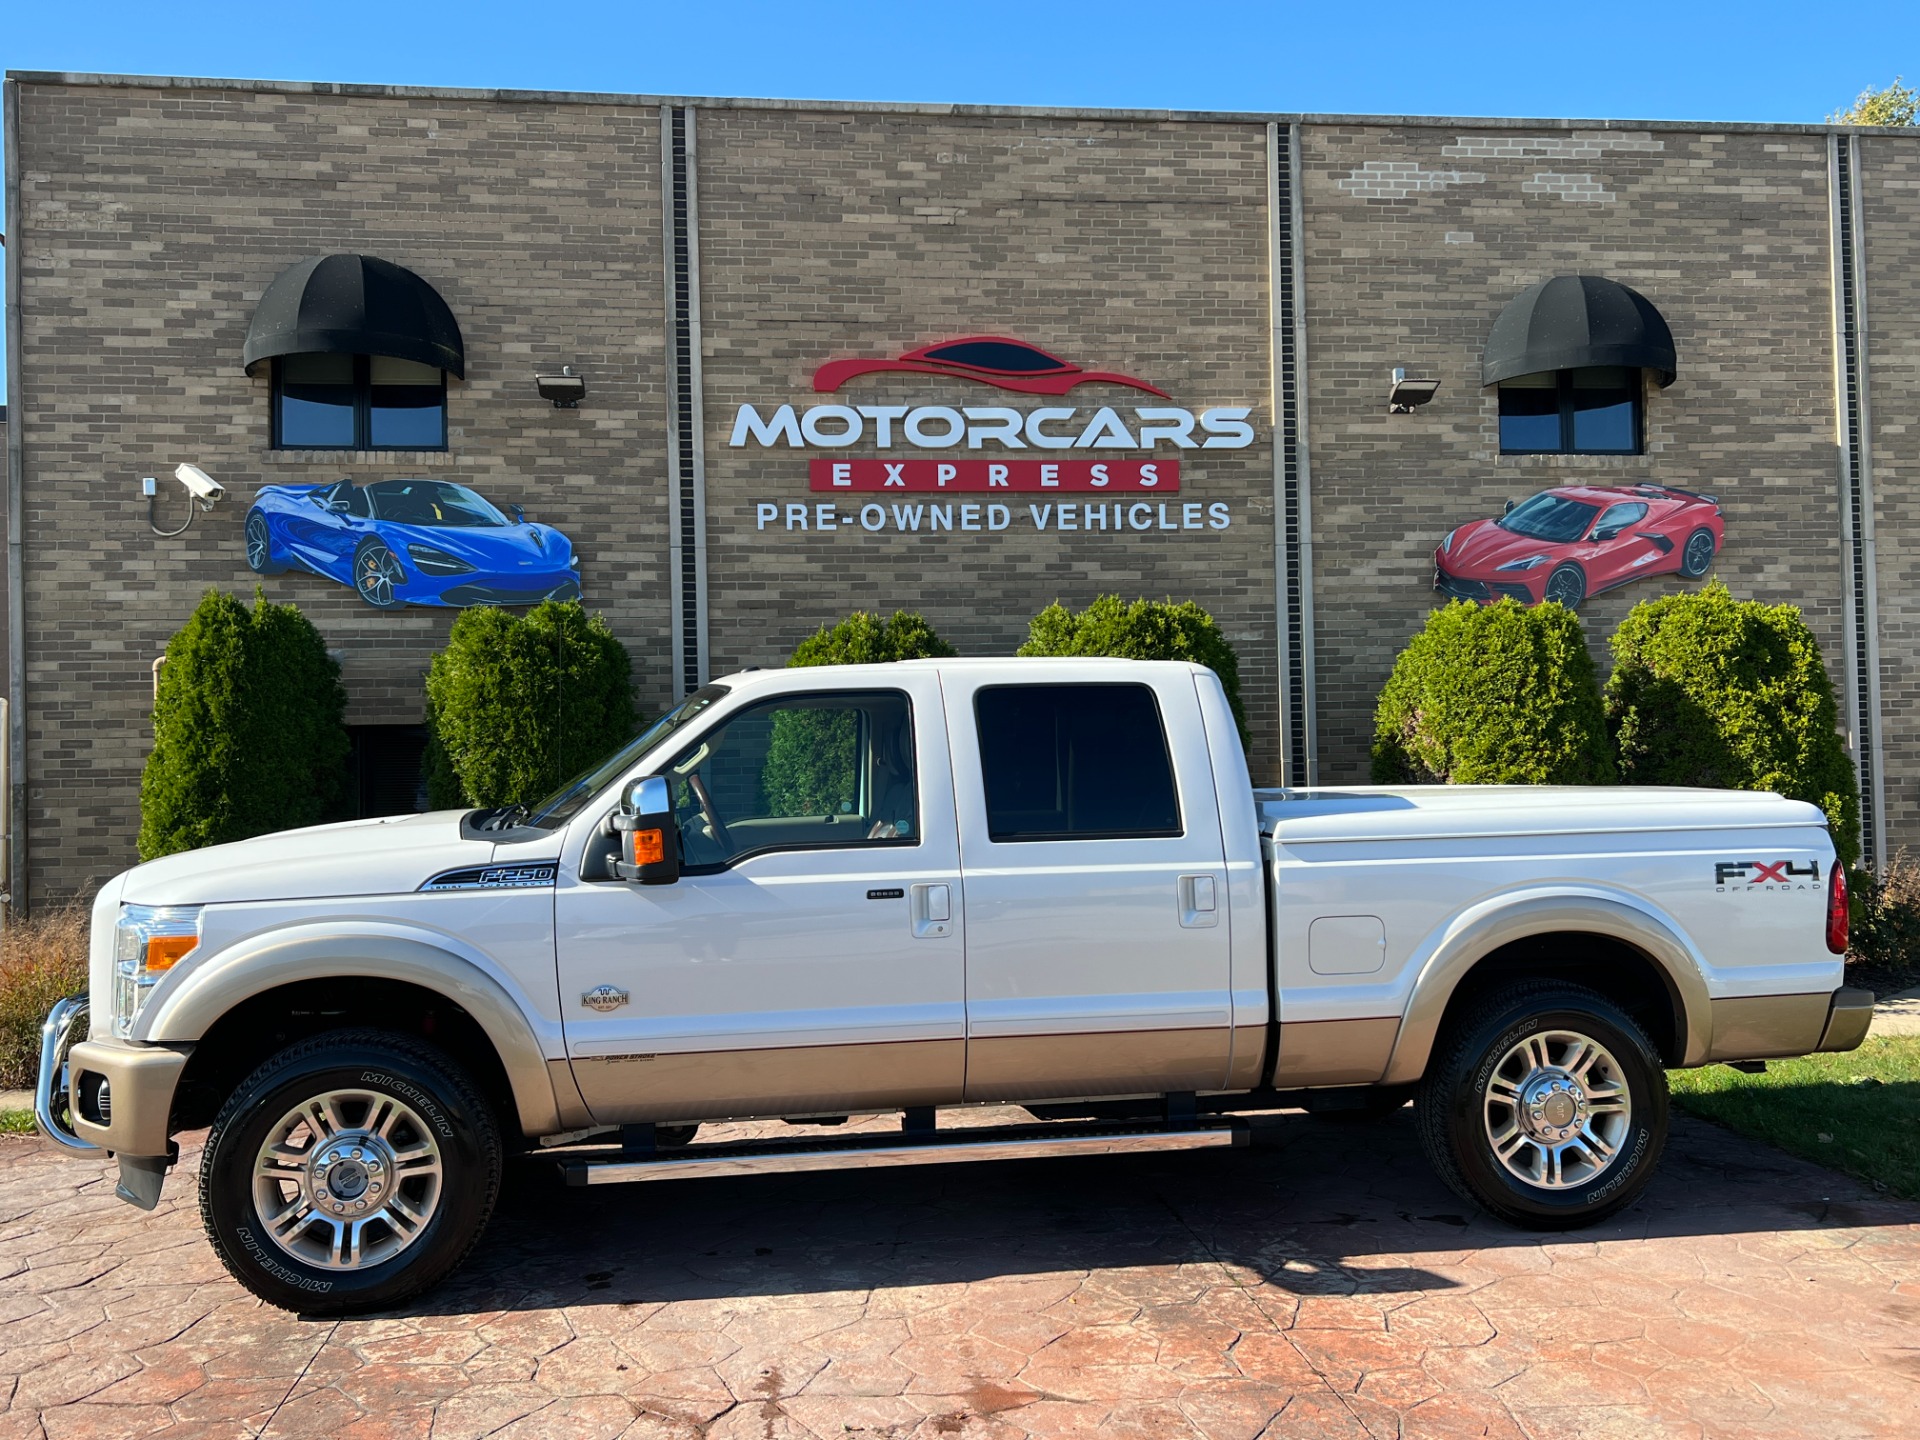 Used-2011-Ford-F-250-Super-Duty-Diesel-Lariat-King-Ranch-4X4